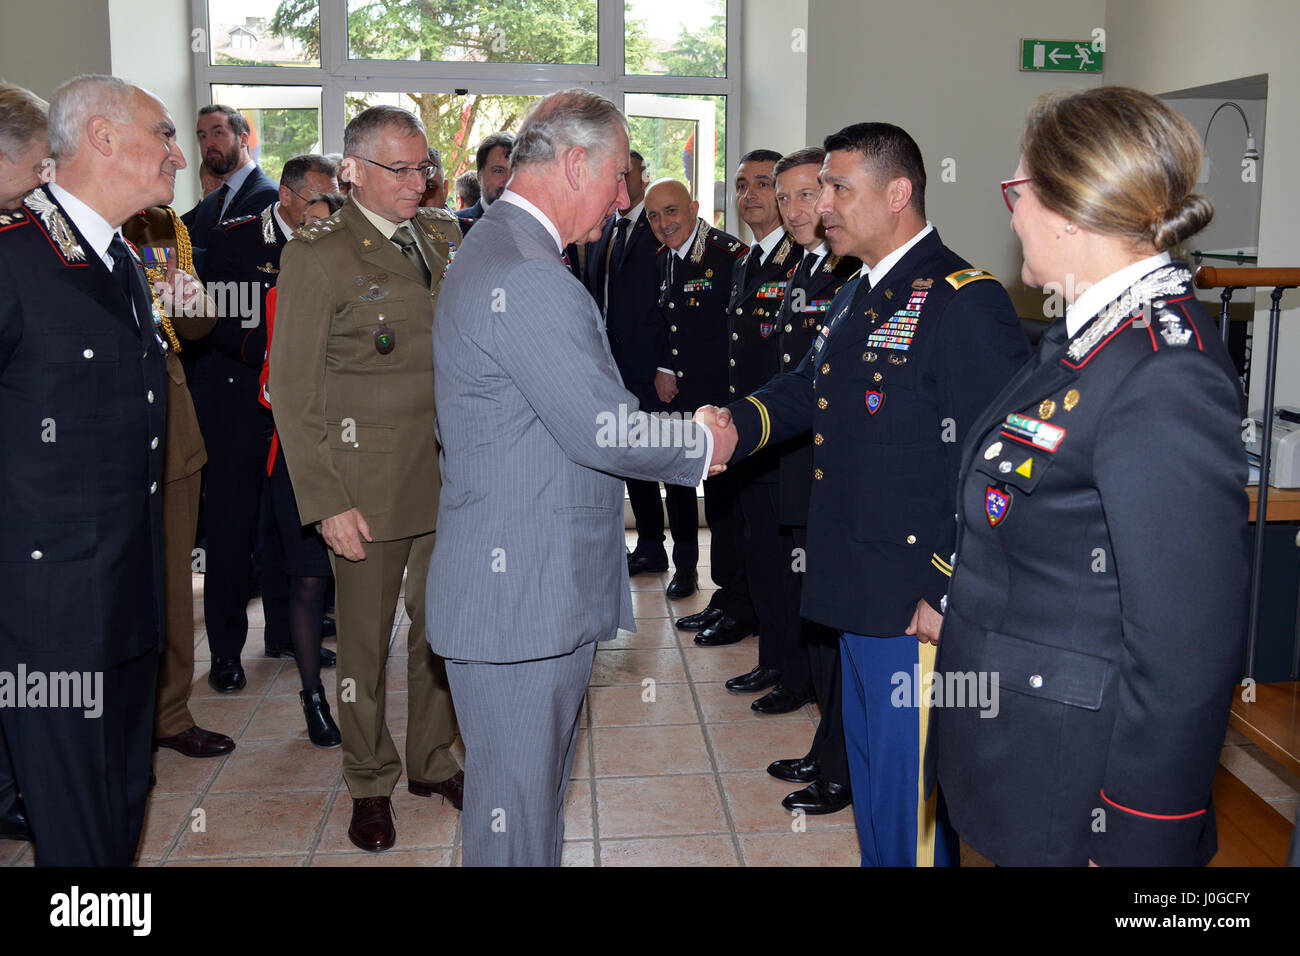 The Royal Highness, Prince Charles, Prince of Wales, meets U.S. Army Col. Darius S. Gallegos, CoESPU deputy director, during visit at Center of Excellence for Stability Police Units (CoESPU) Vicenza, Italy, April 1, 2017. (U.S. Army Photo by Visual Information Specialist Antonio Bedin/released) Stock Photo